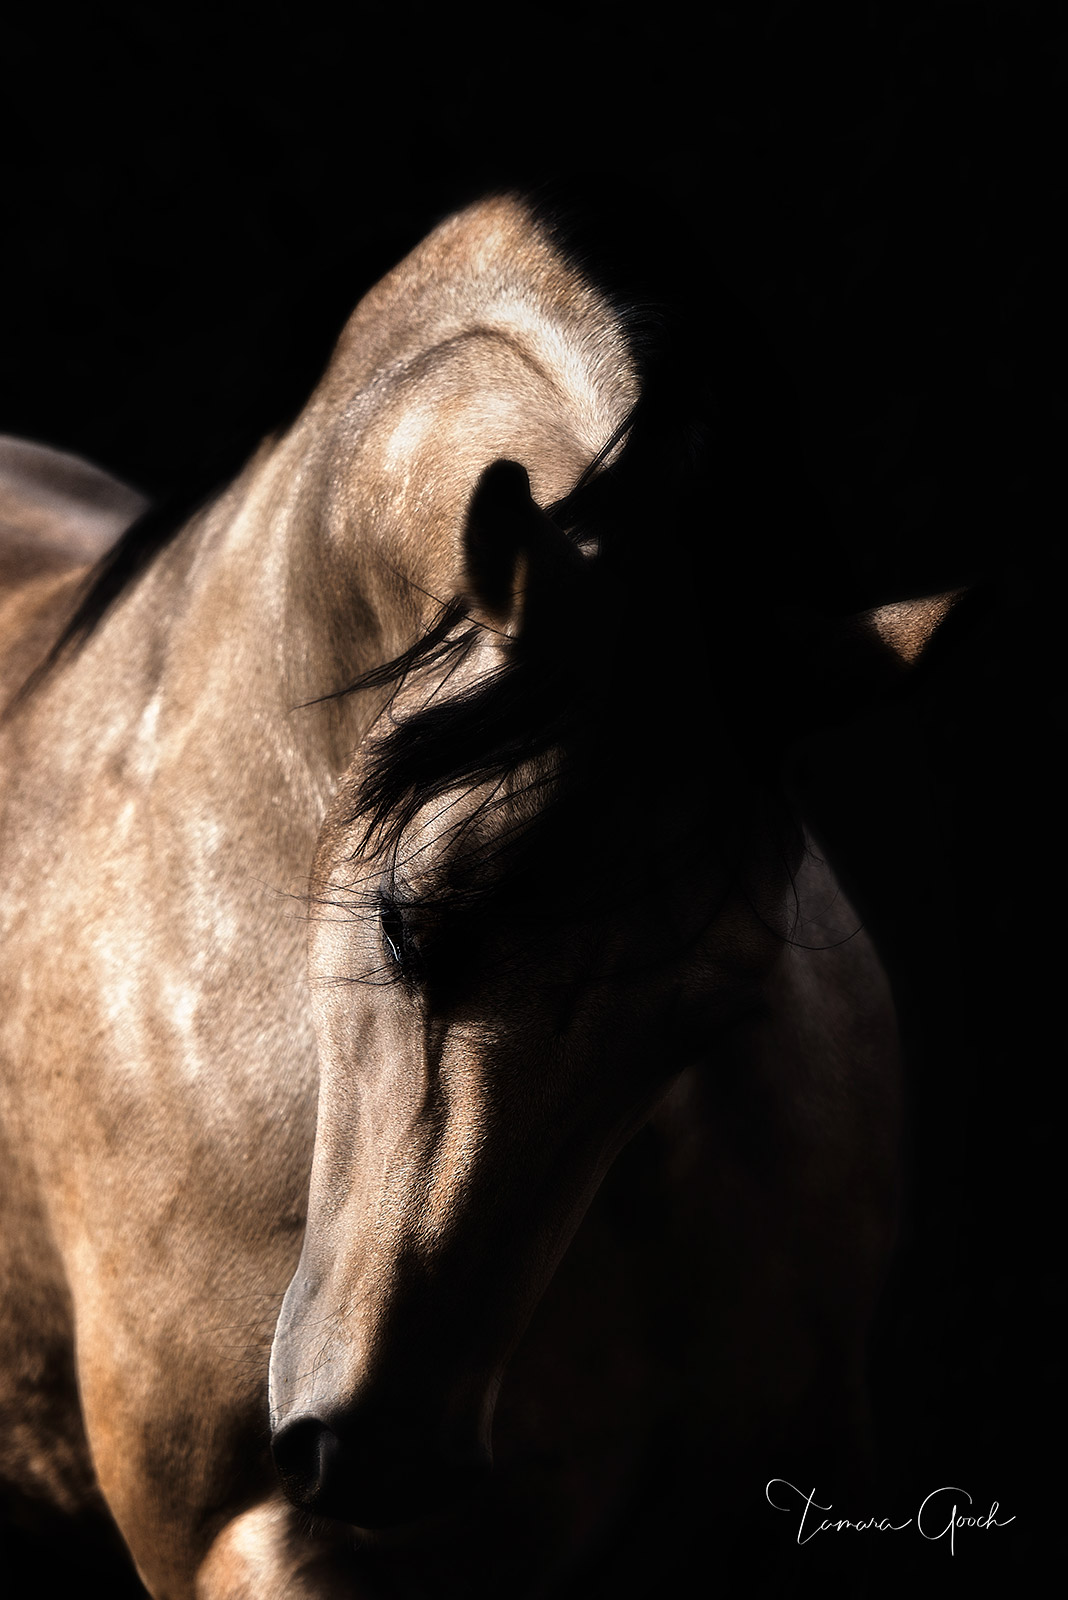 A beautiful photograph of a buckskin horse. Available as a gallery quality fine art print. Artwork and wall art for the home or office.